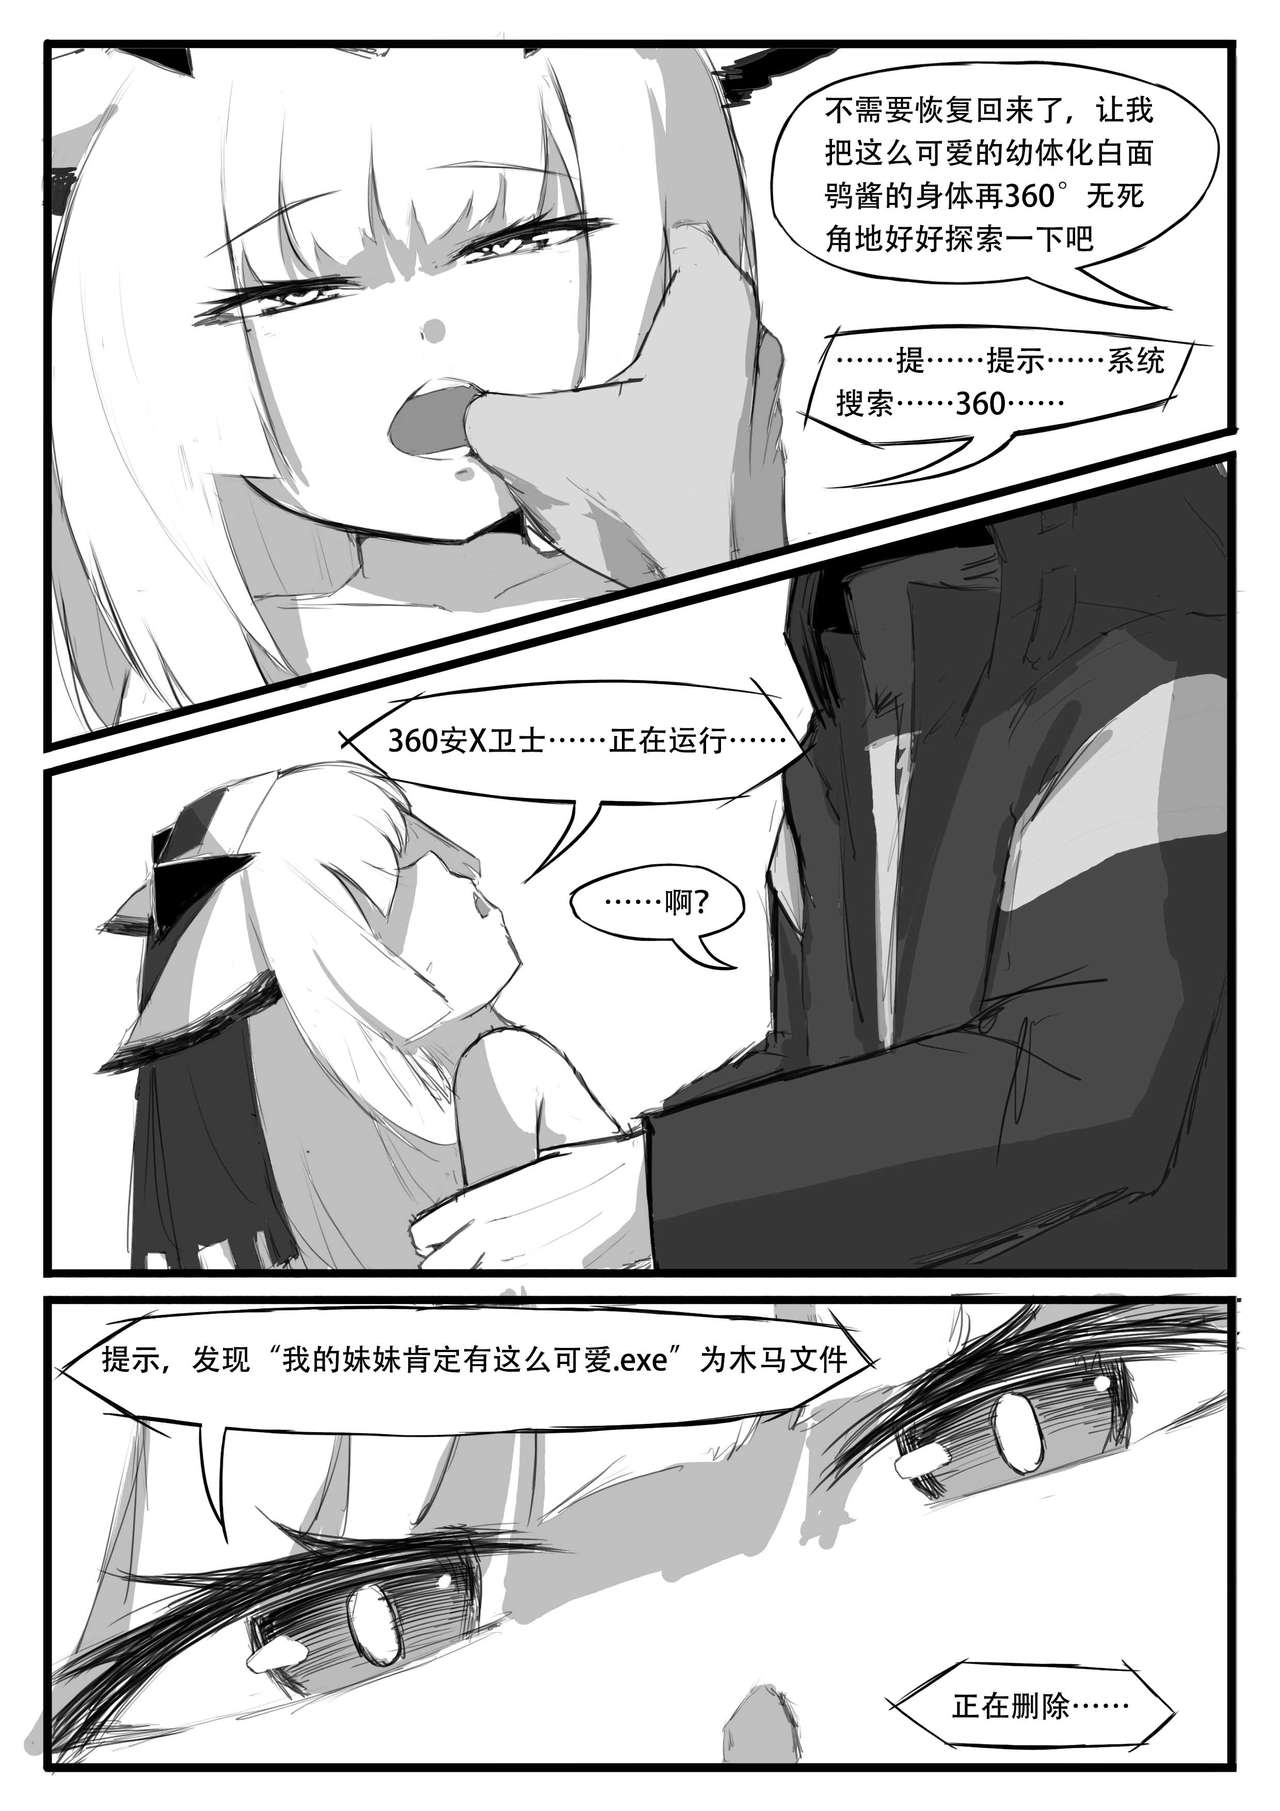 [saluky] 关于白面鸮变成了幼女这件事 (Arknights) [Chinese] page 24 full